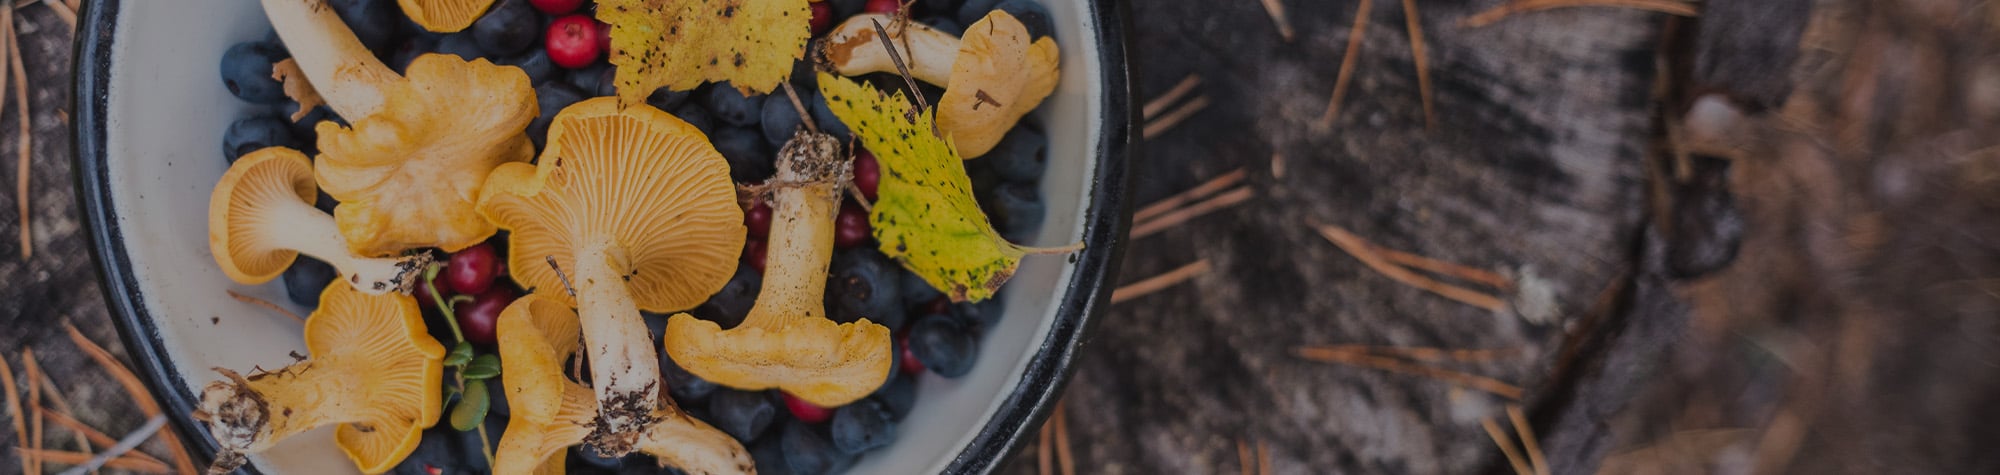 Finding Food Outdoors: A Beginner’s Guide to Foraging